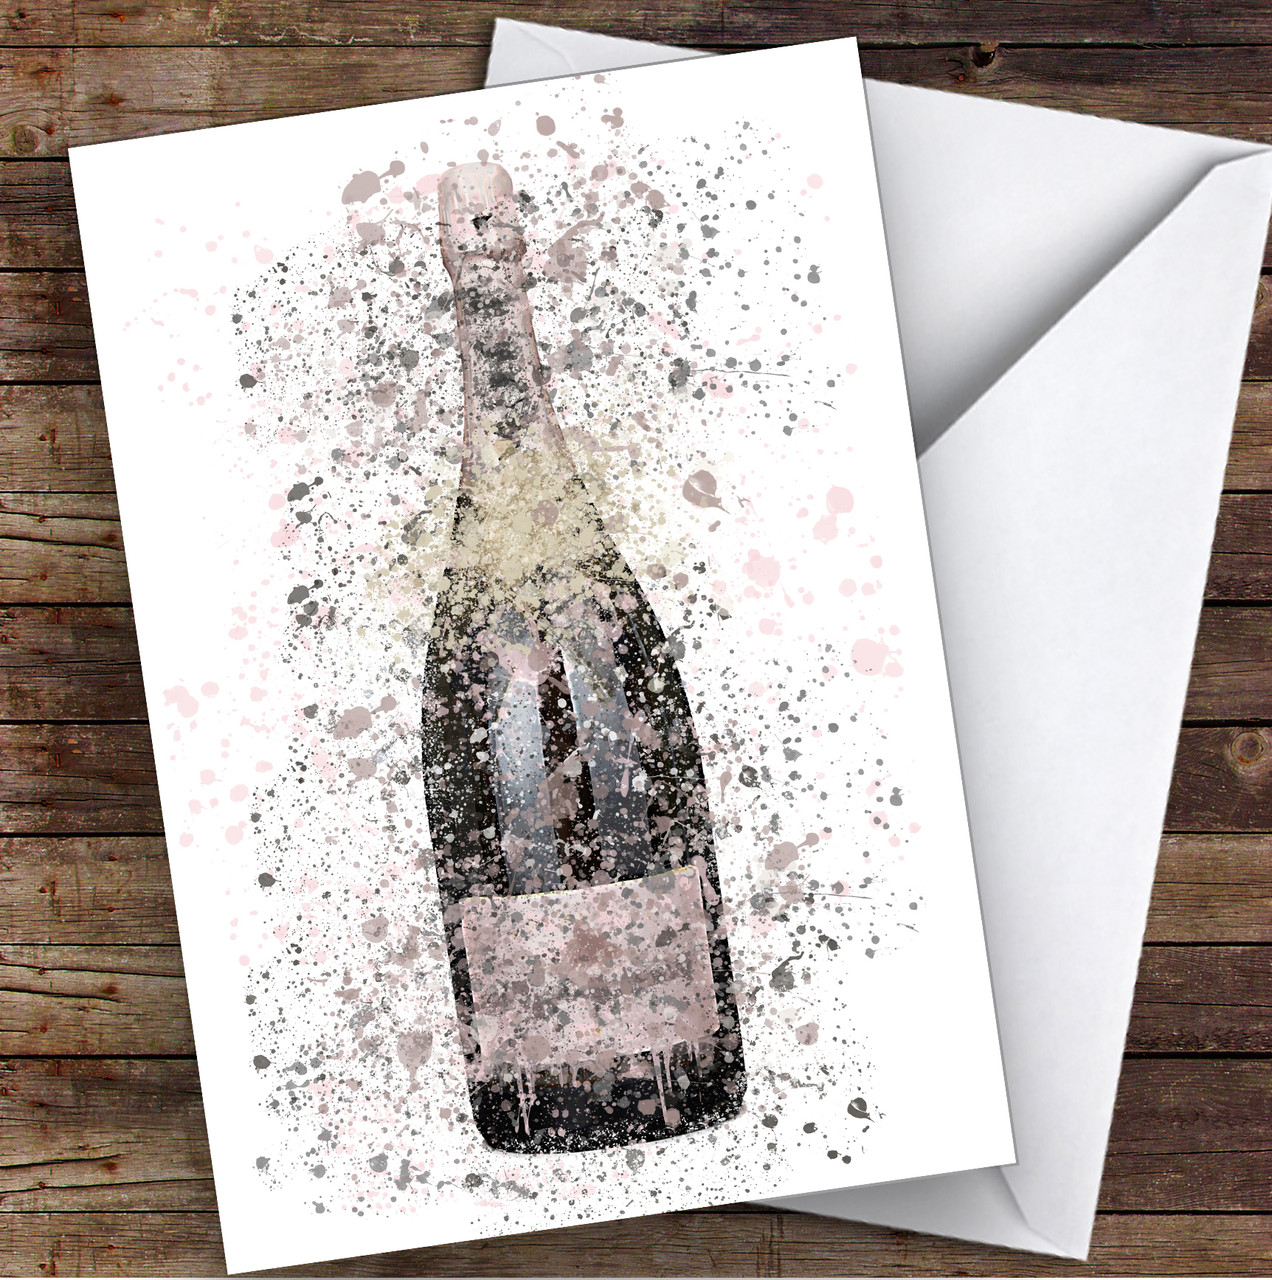 champagne bottle drawing